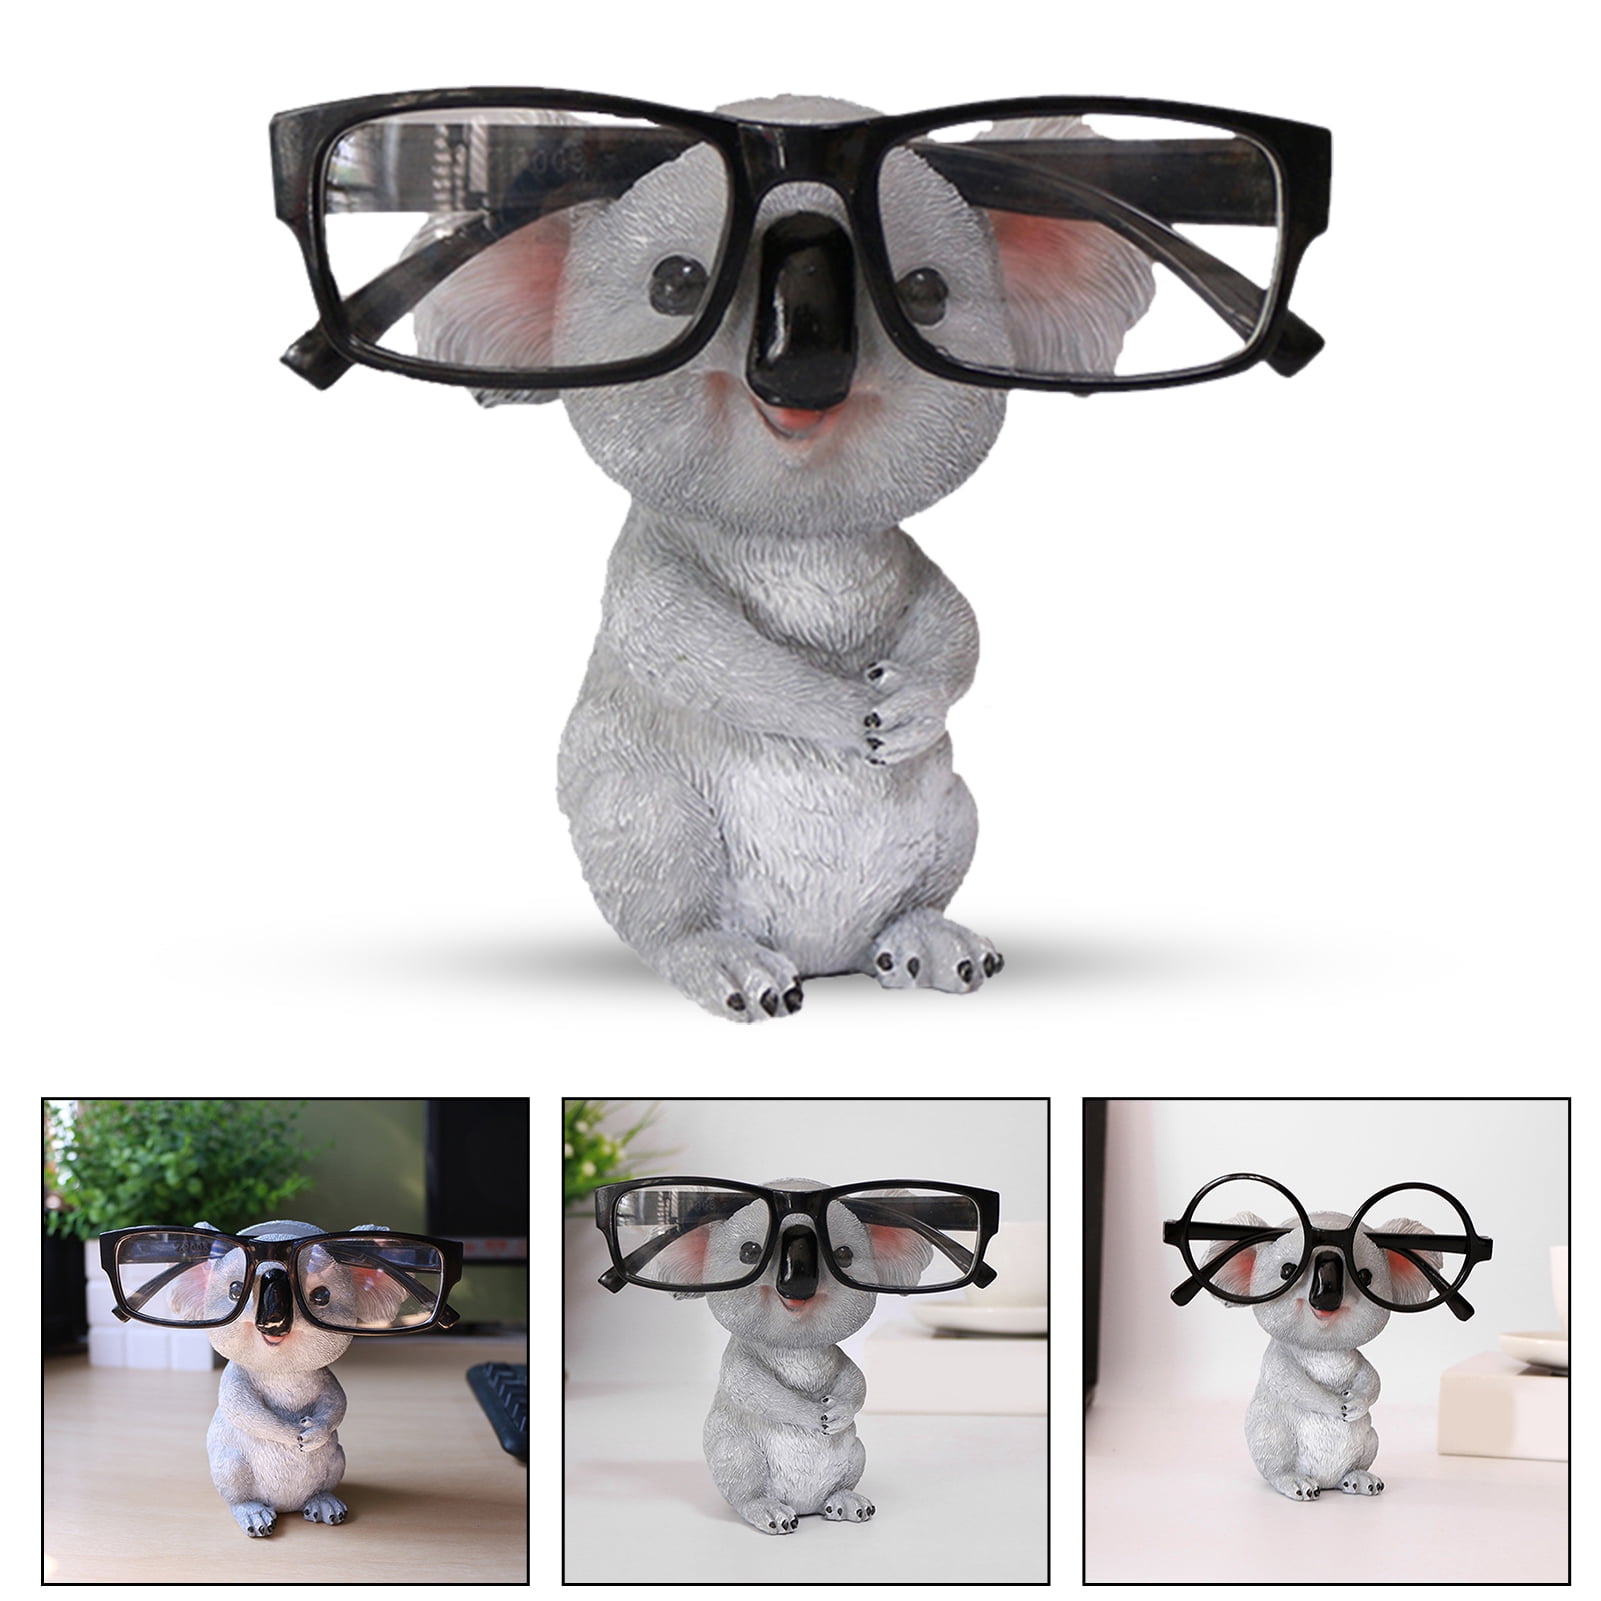 BetterZ Eyeglass Display Stand Stable Animal Image Eye-catching Cute Koala  Spectacle Organizer Ornaments for Home 